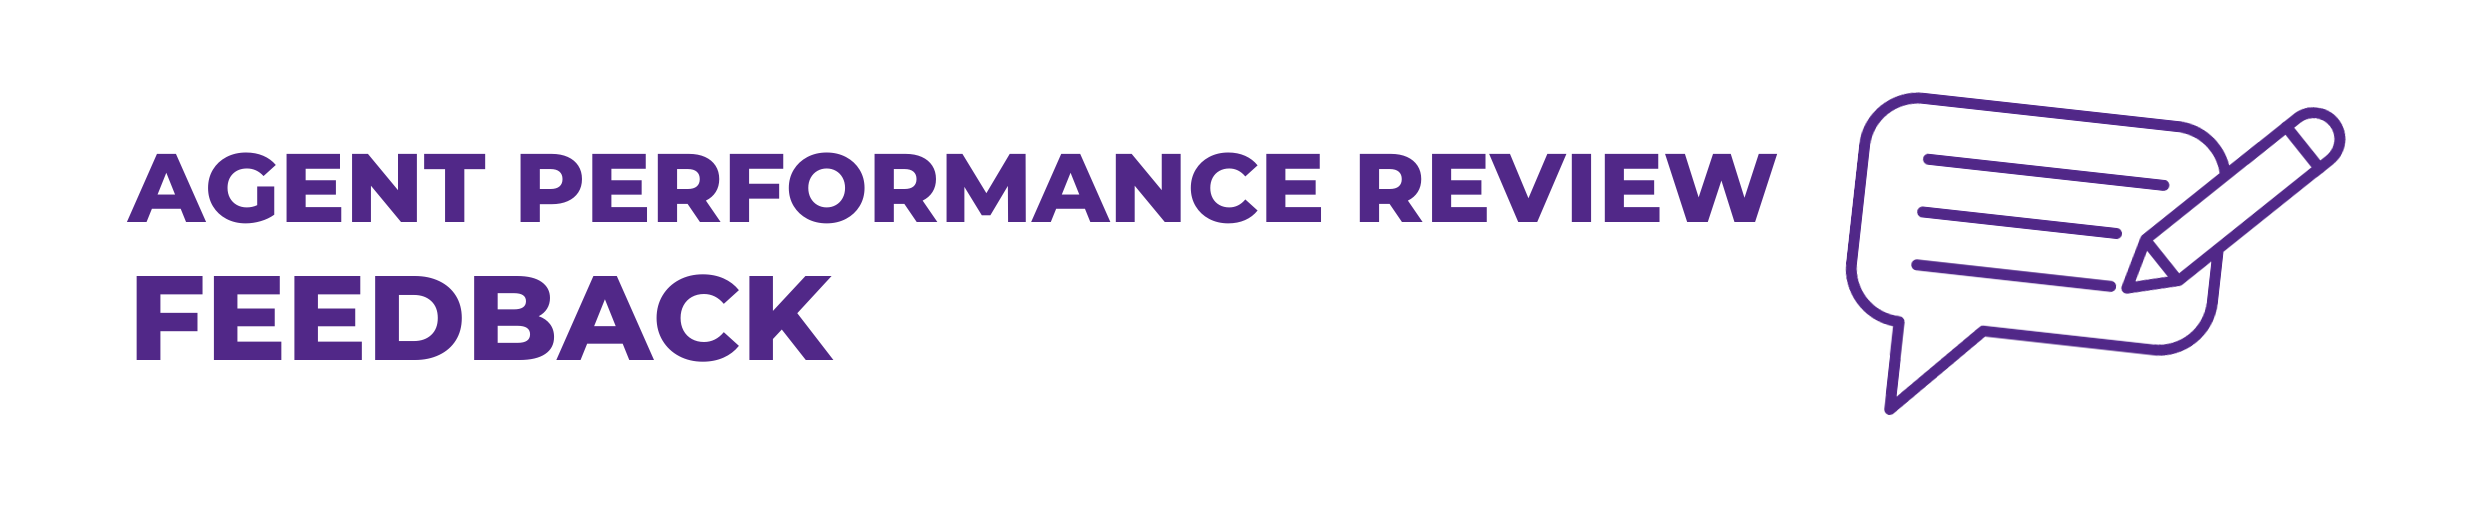 Agent Performance Review Feedback